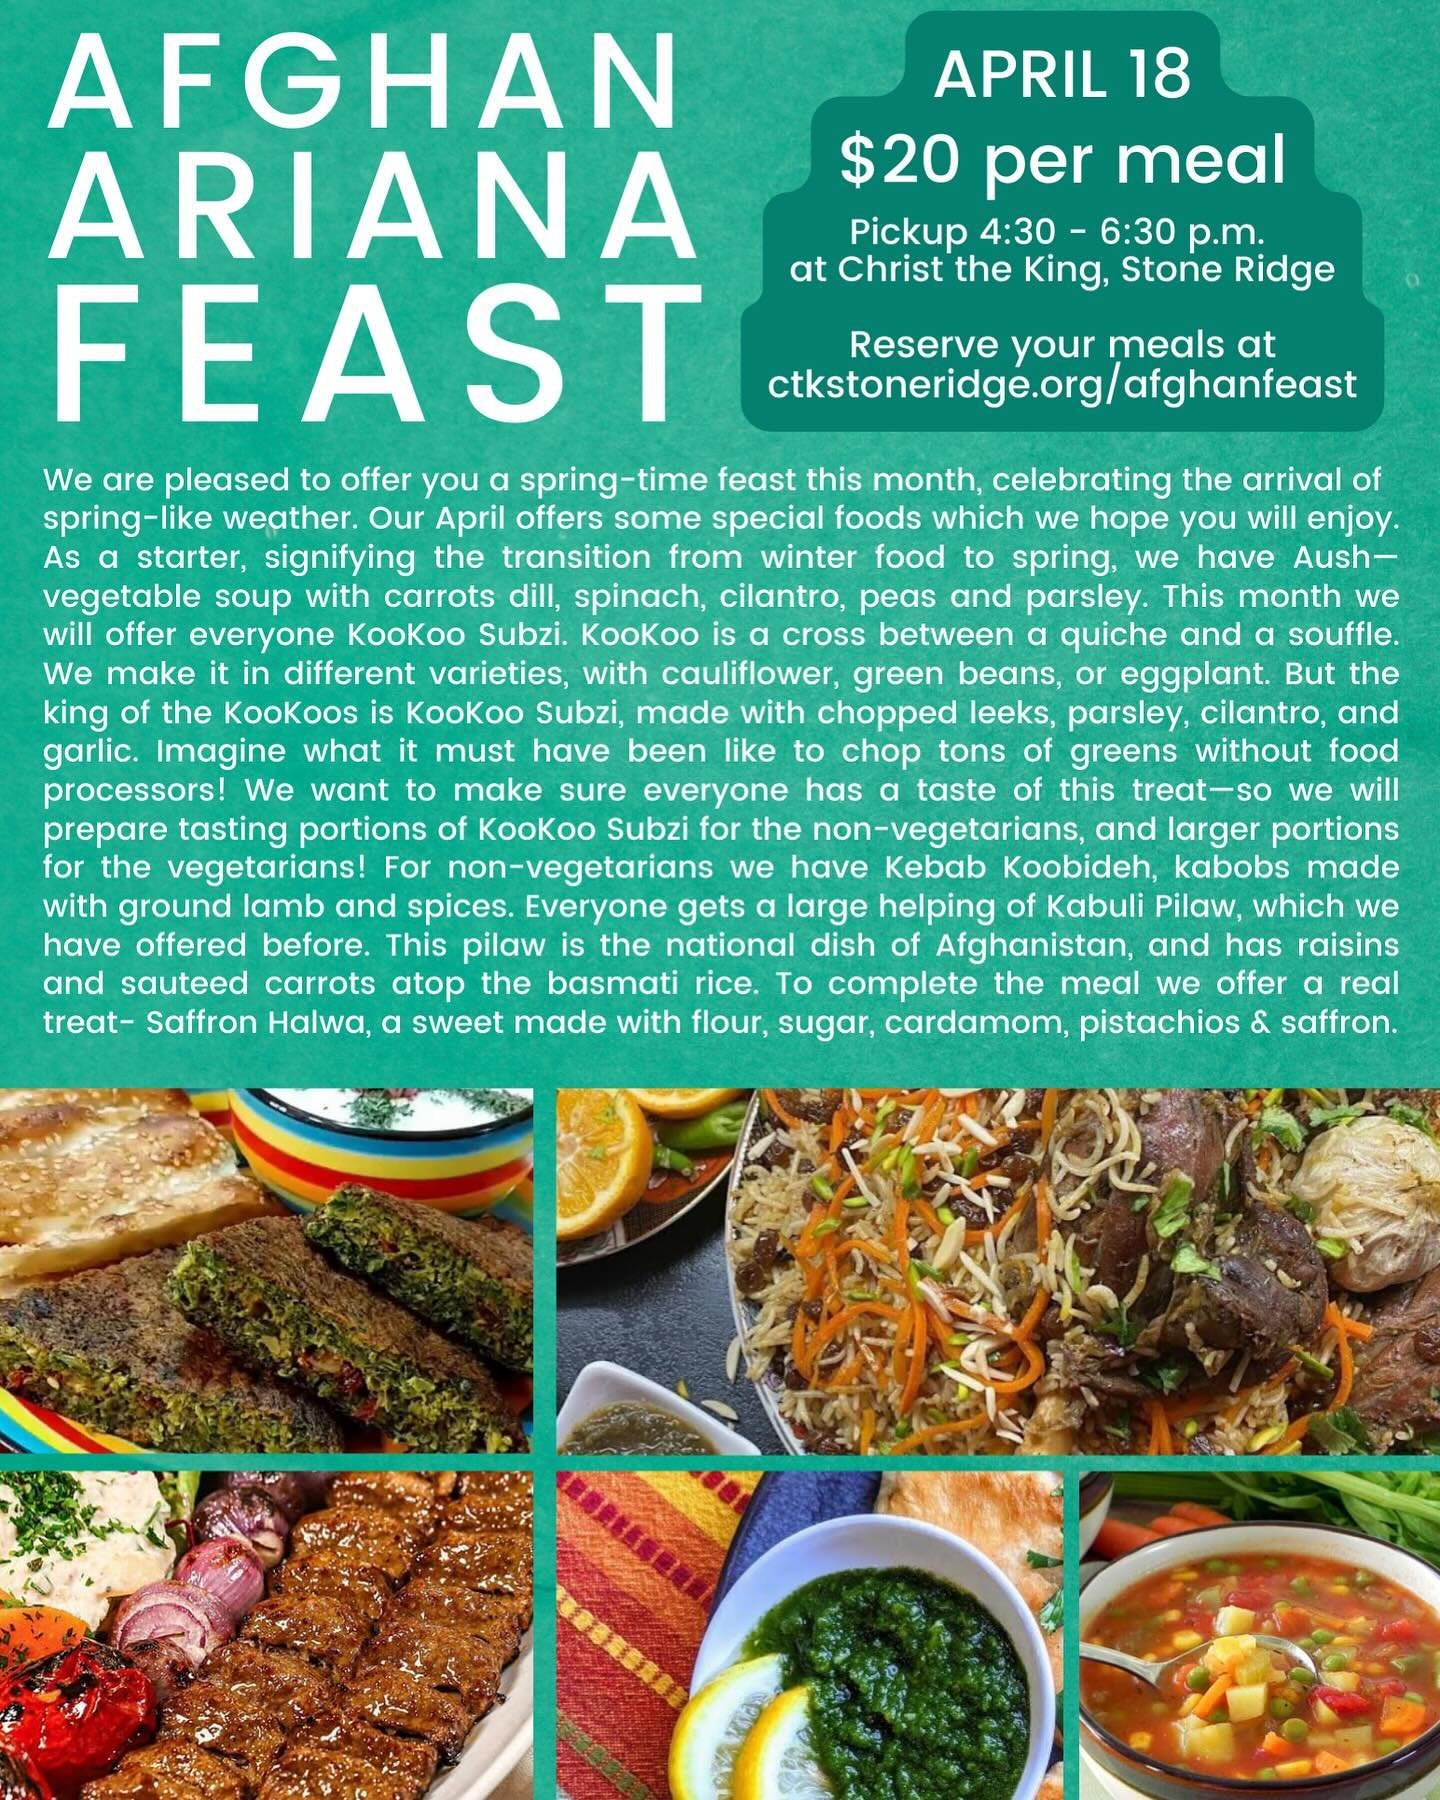 Afghan Feast this Thursday! Join us for delicious home cooked Afghan carry out at CTK. Reserve your meals on our website!